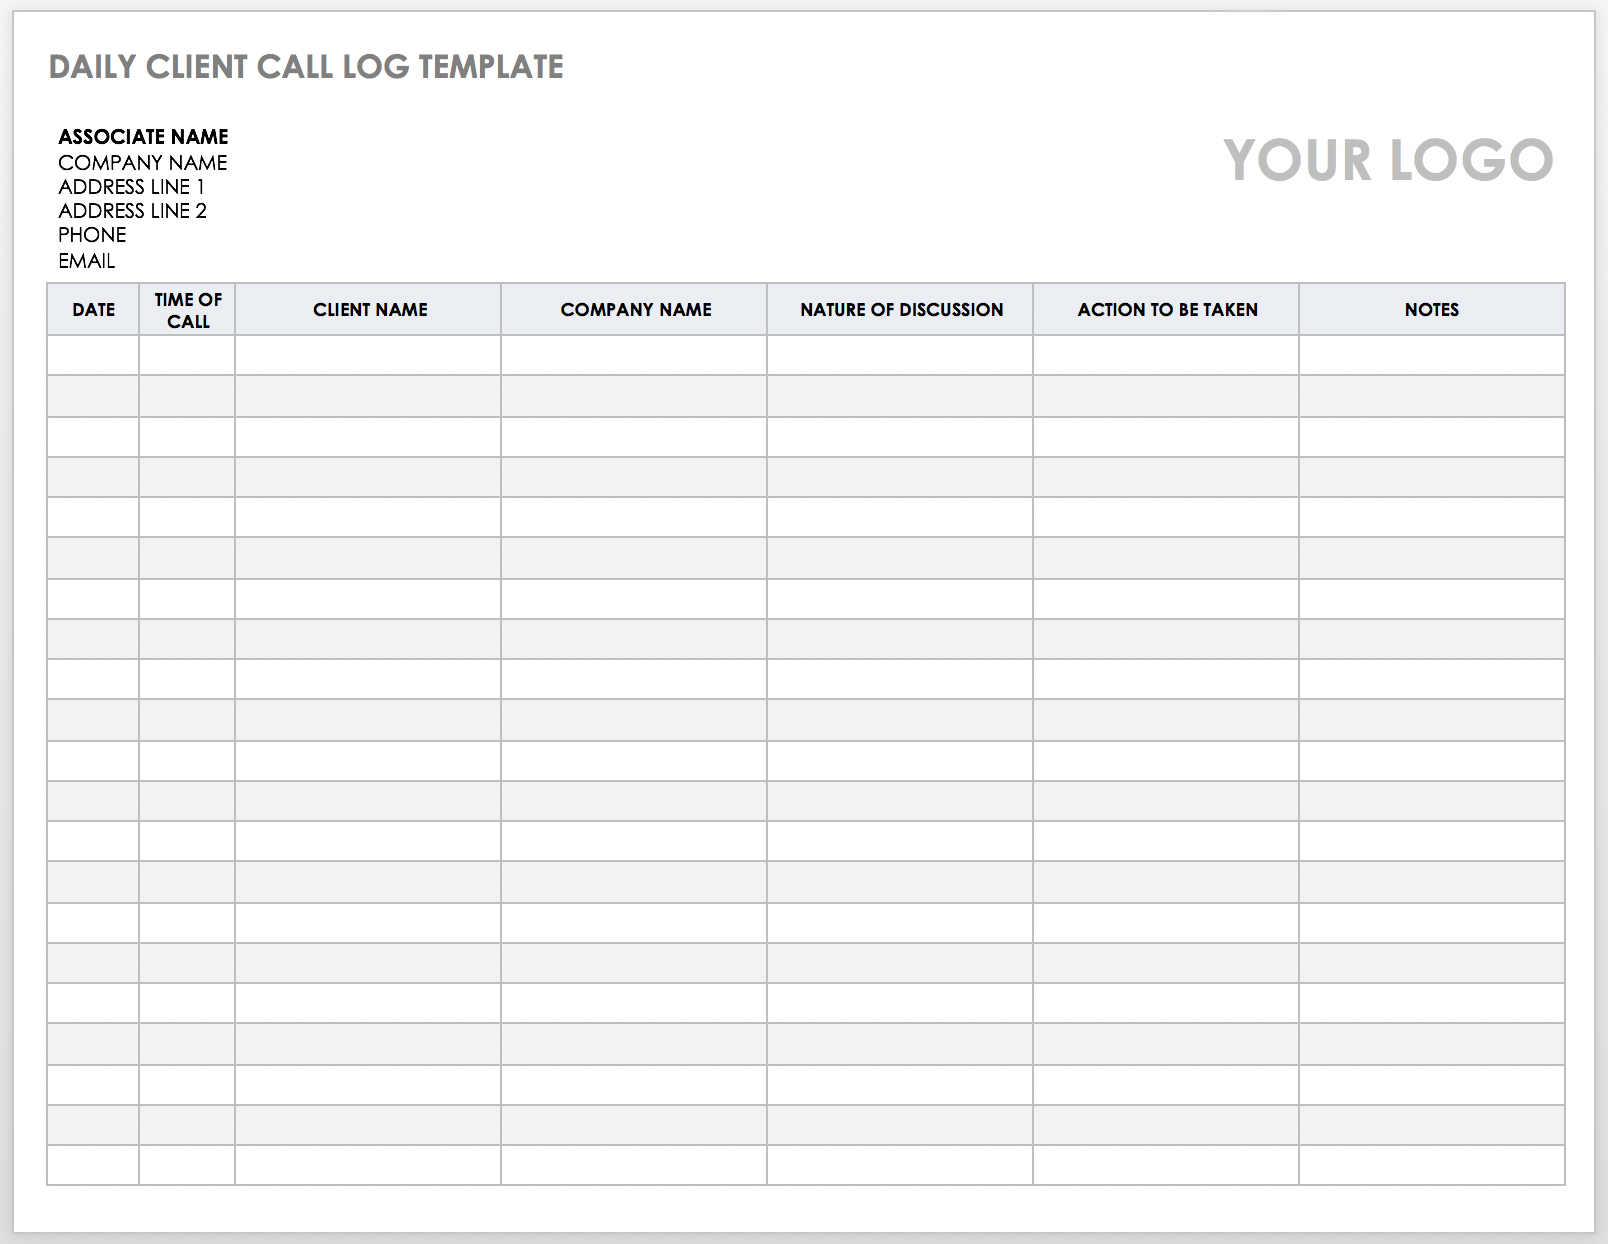 Free Client Call Log Templates  Smartsheet Inside Sales Rep Call Report Template